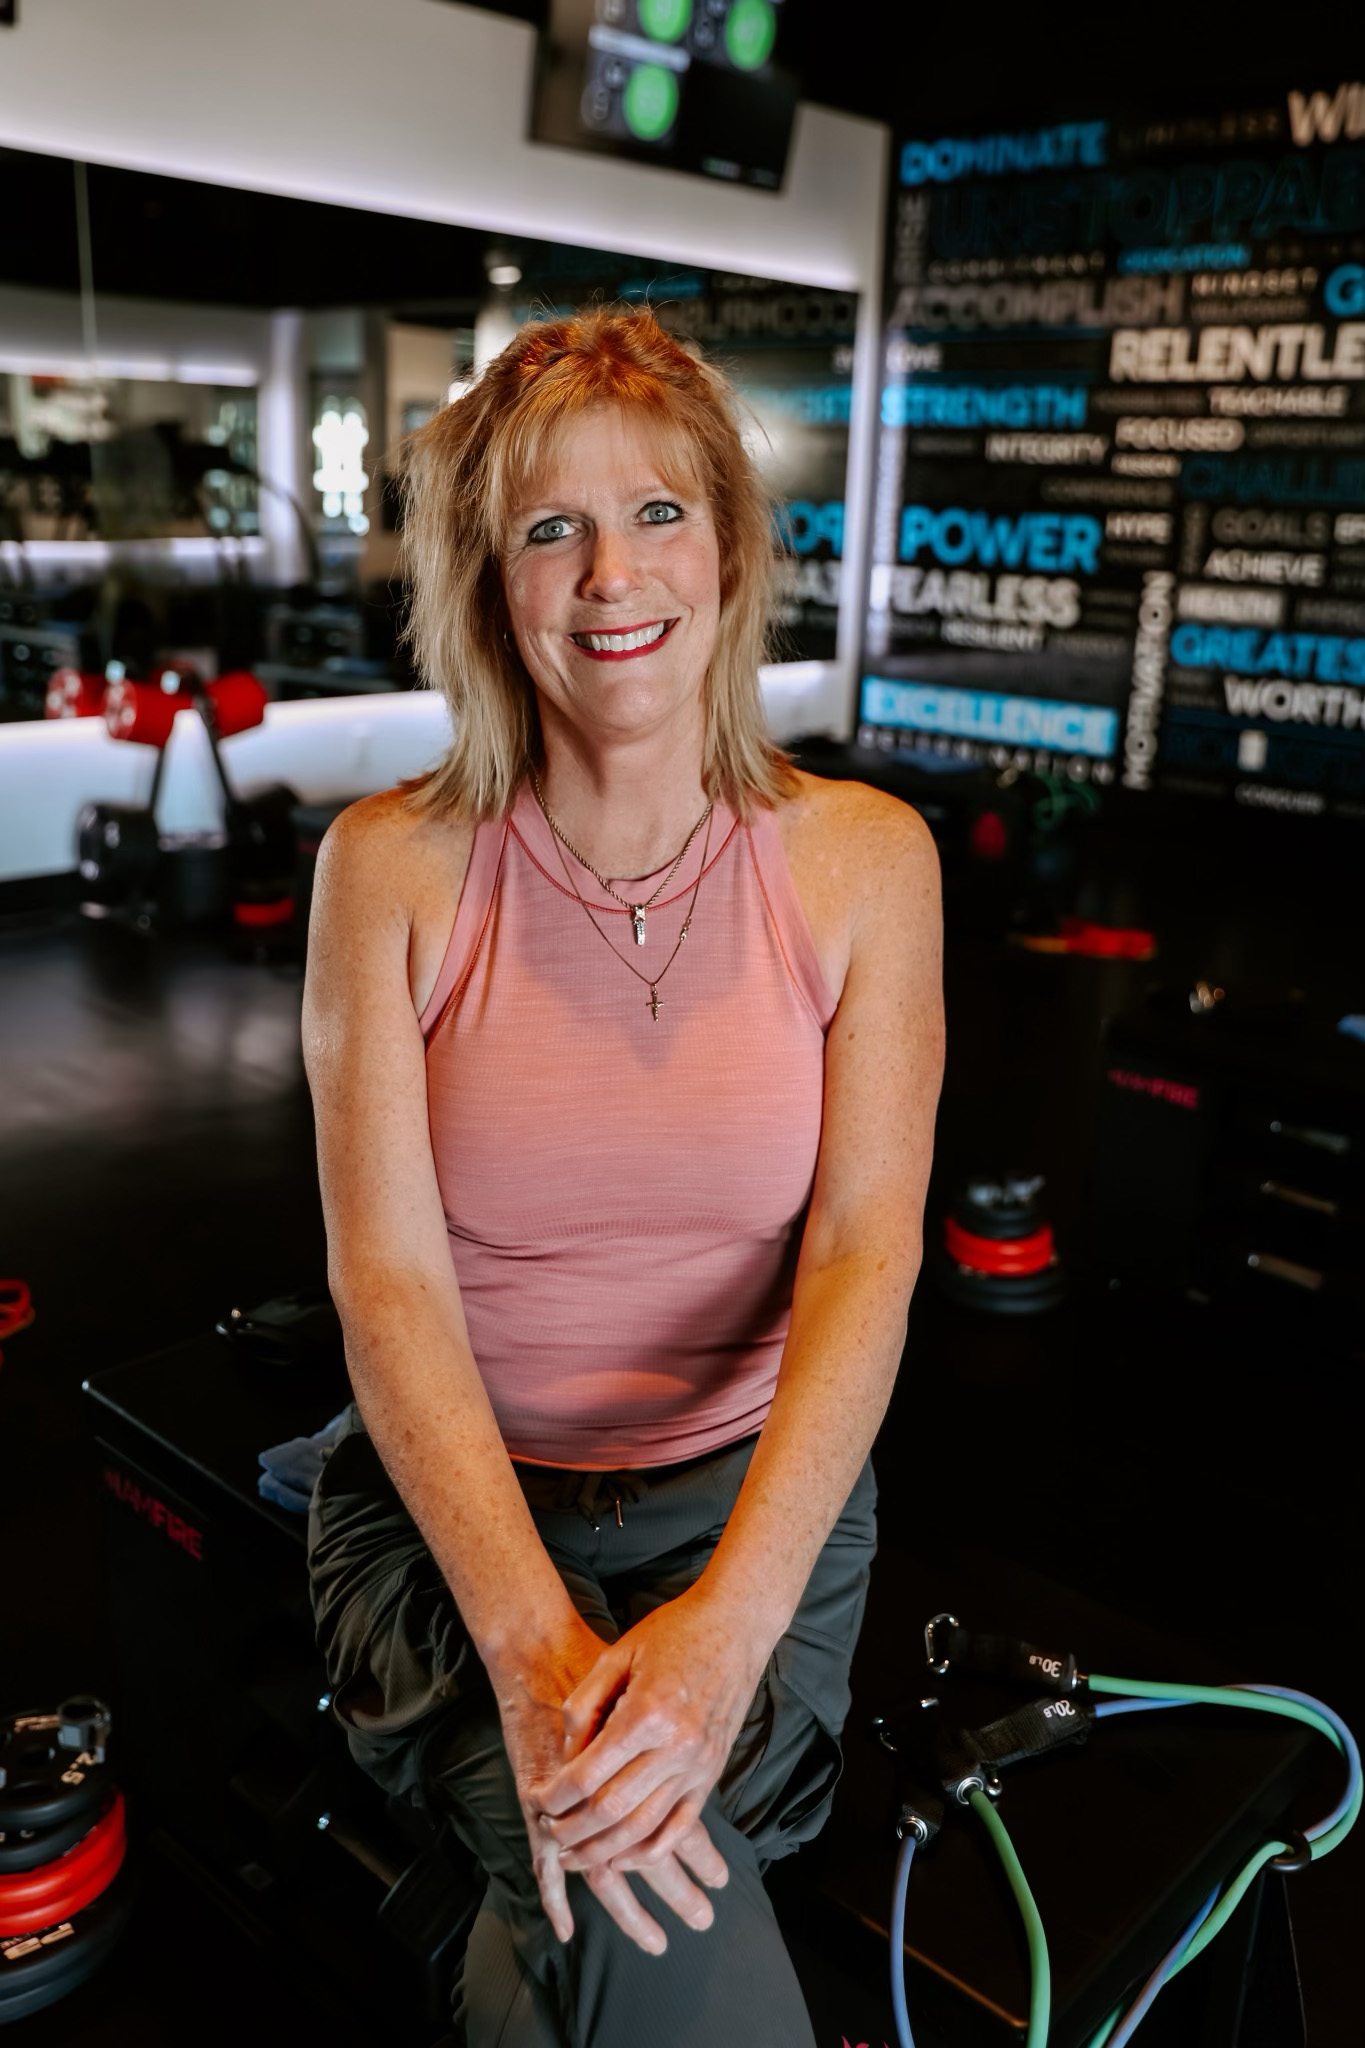 colleen, a member of omaha's ultimate workout gym